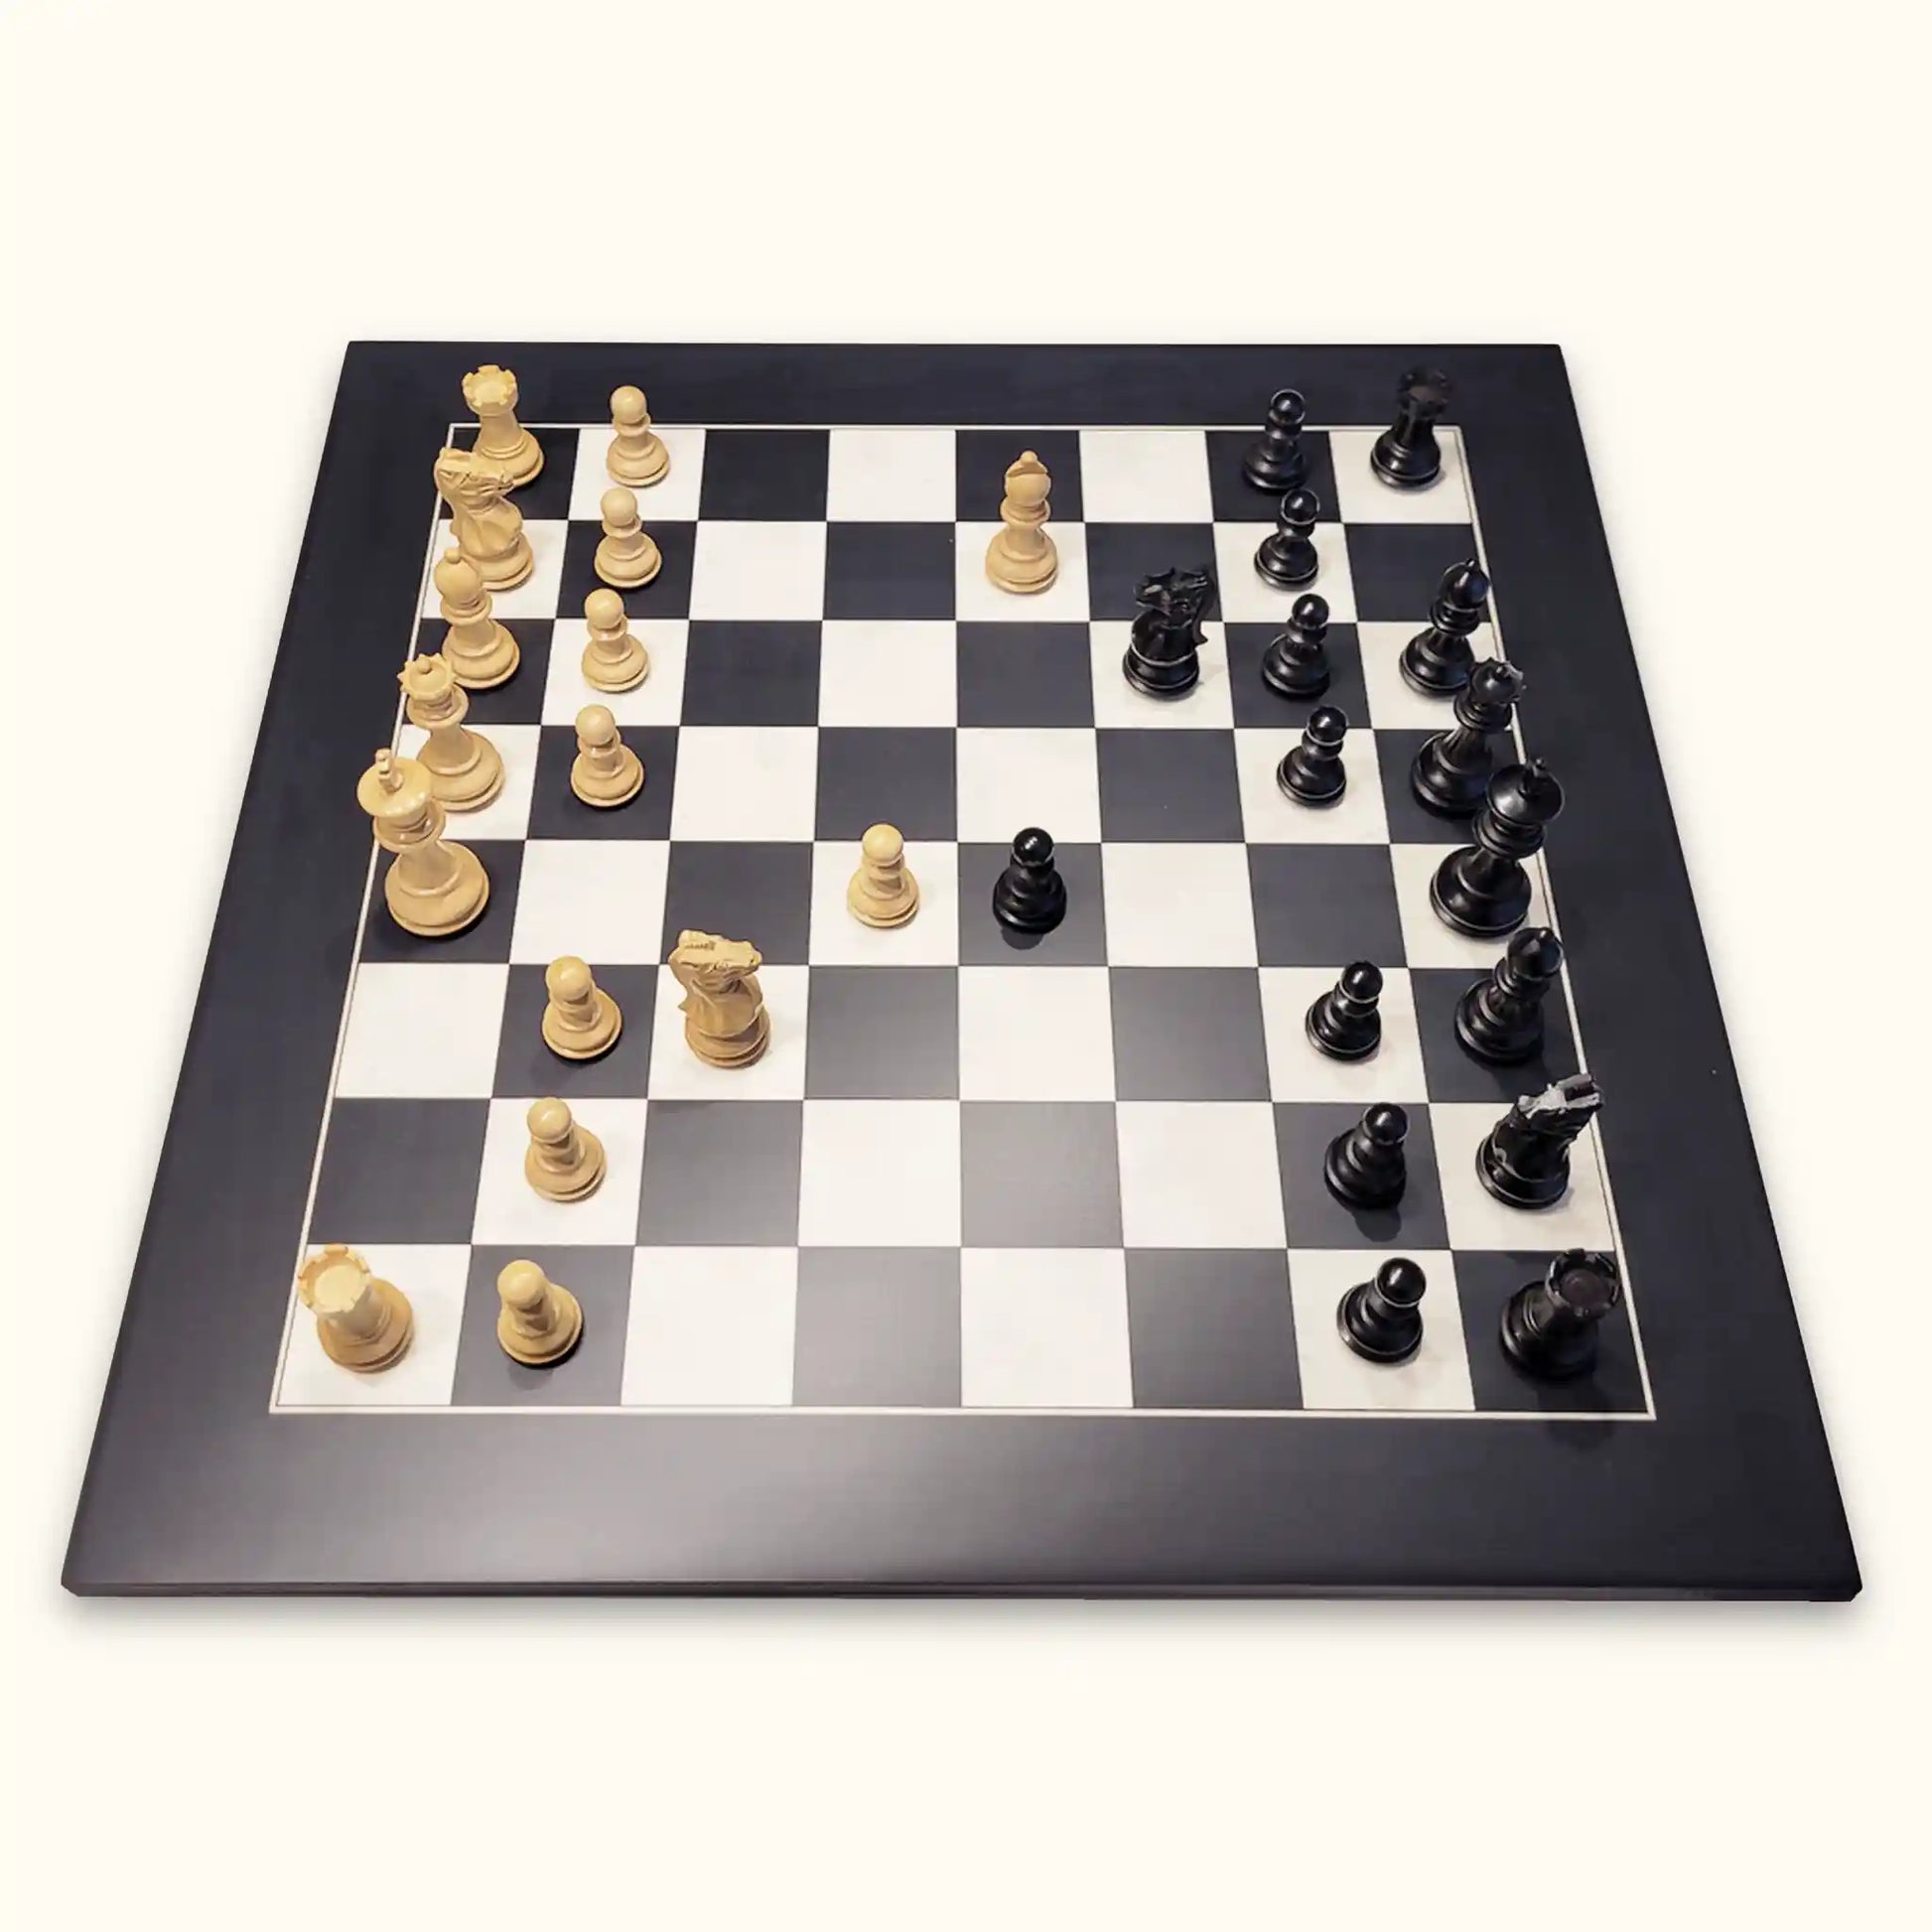 Chess pieces grace black on black chessboard side